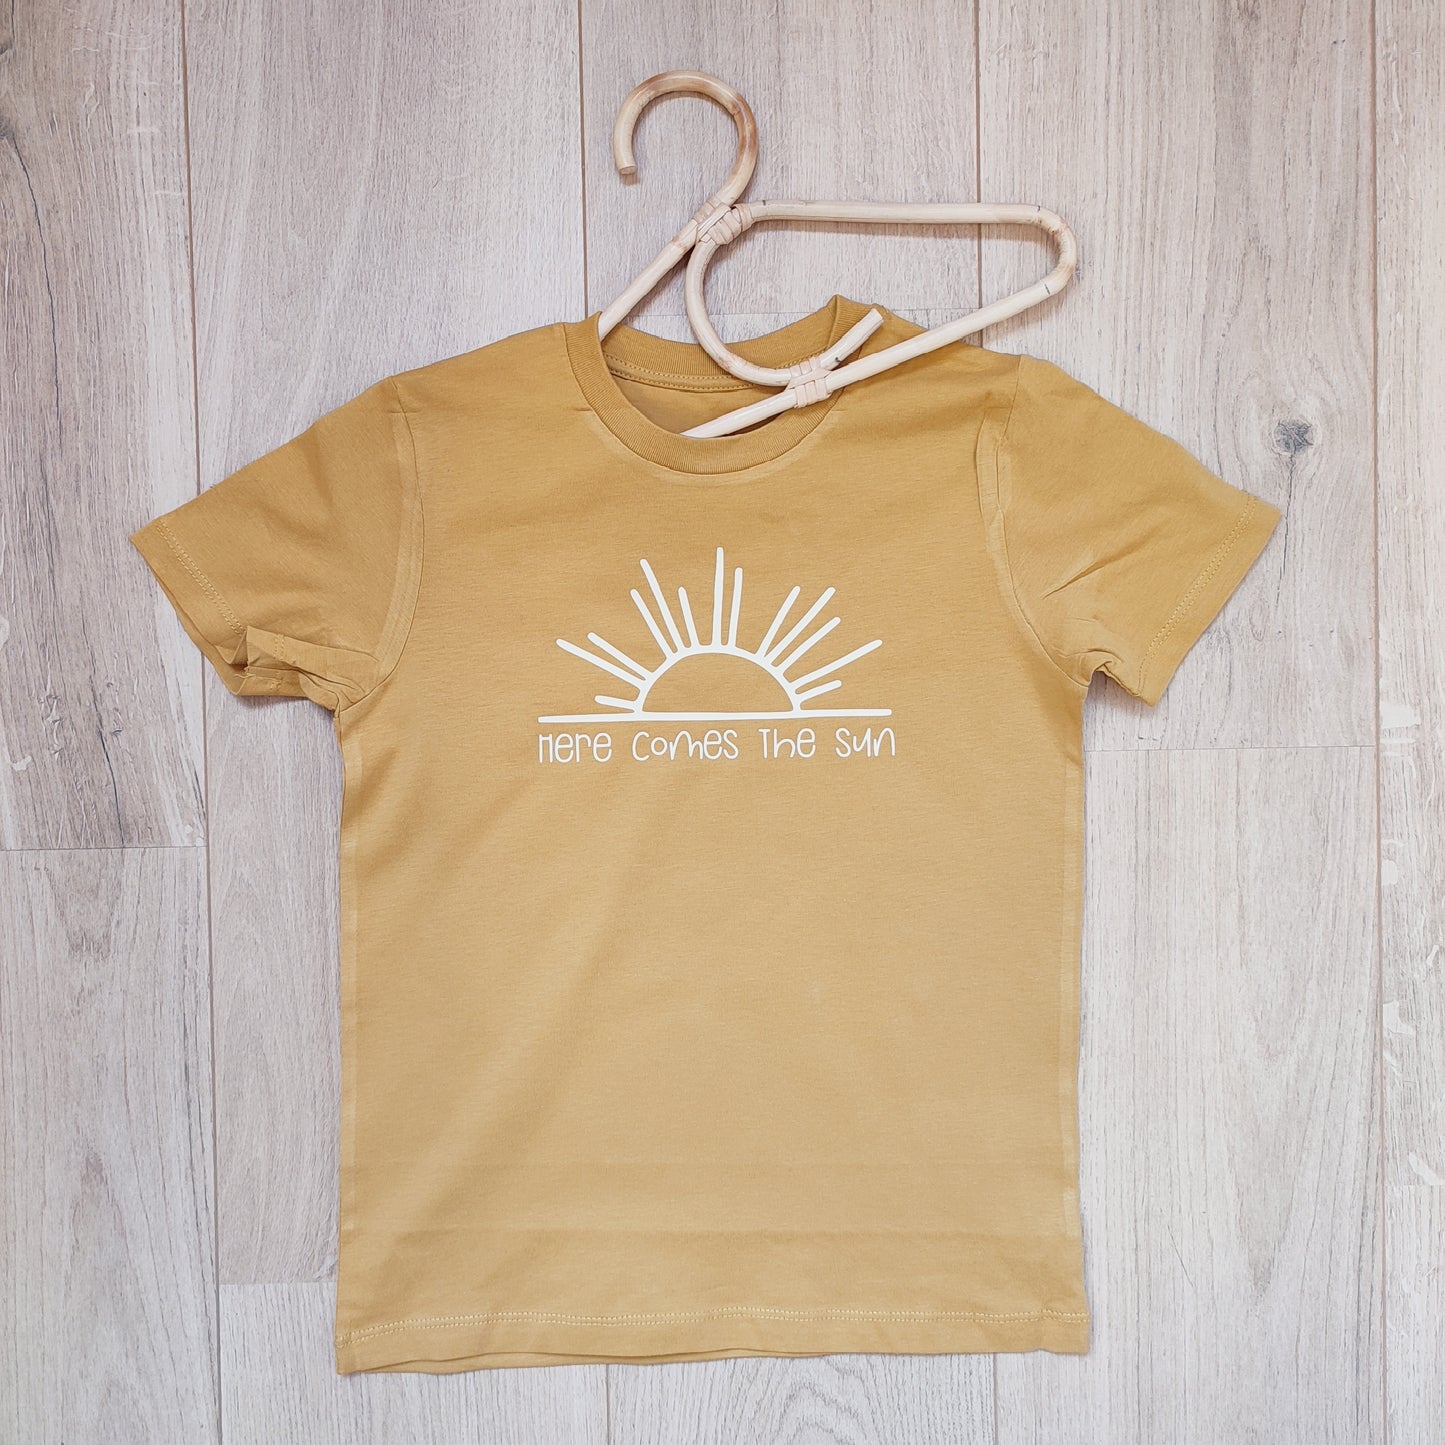 T-shirt "here comes the sun"